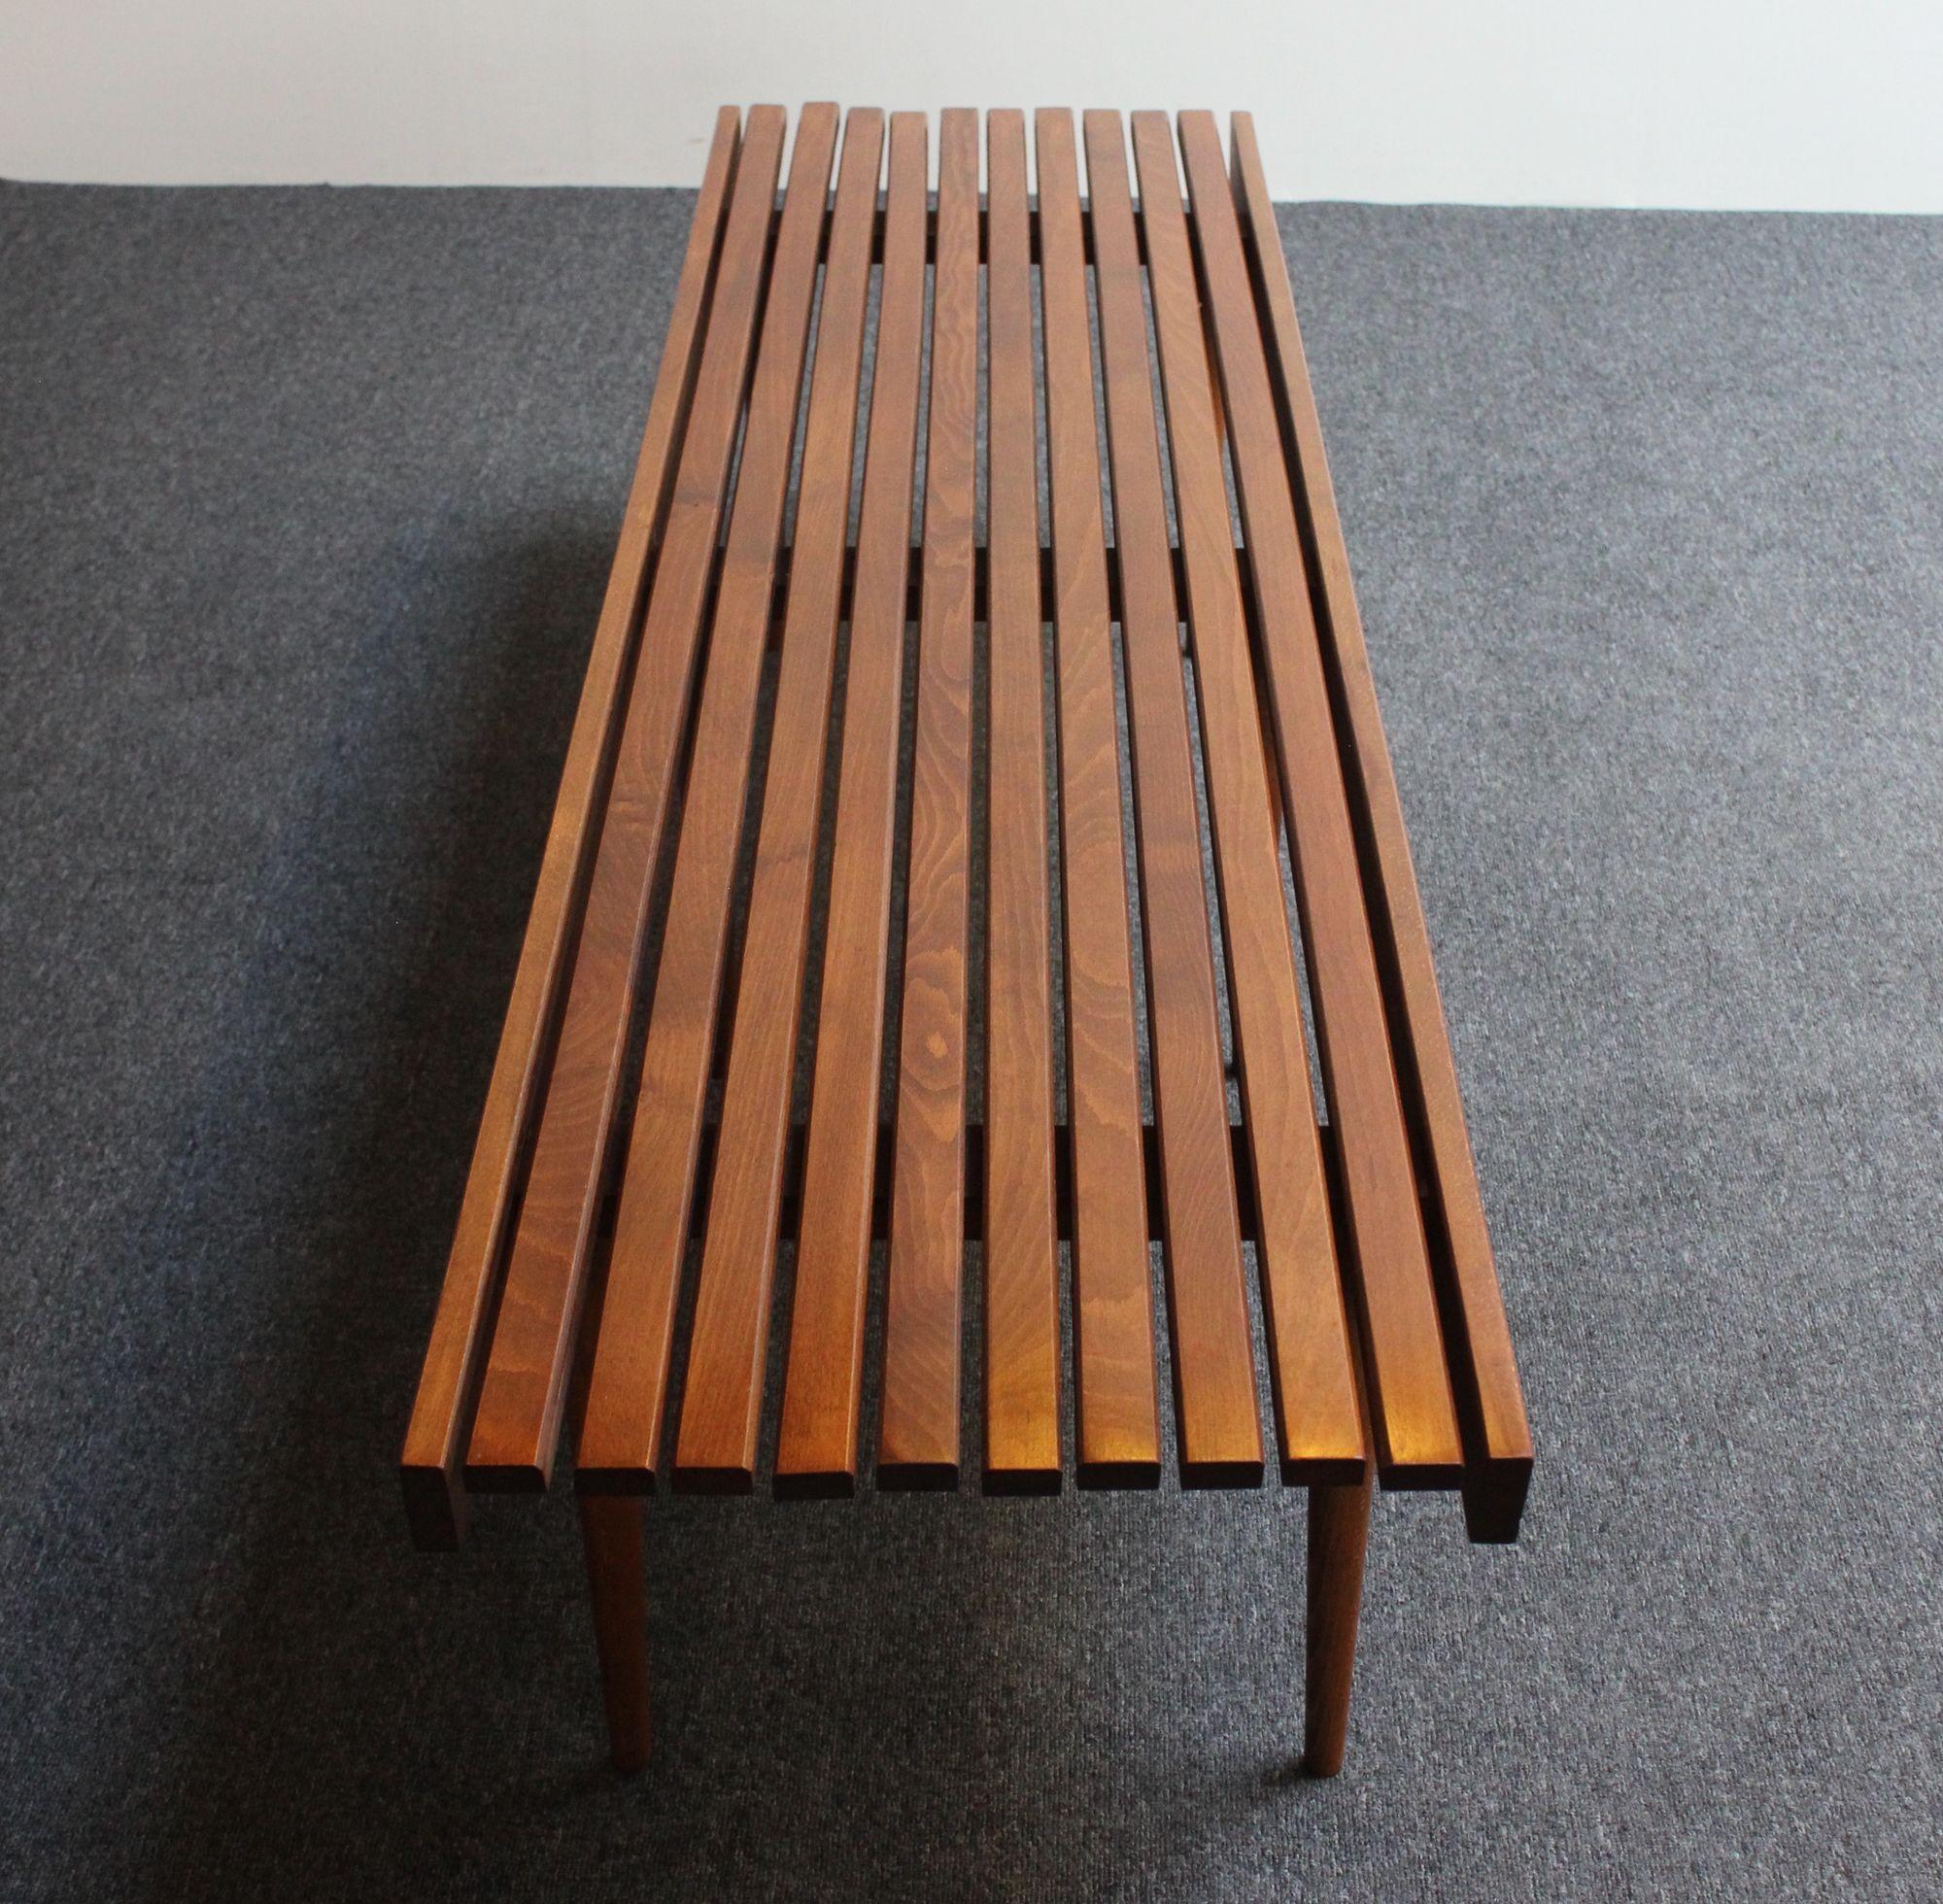 Long Mid-Century Modern Walnut Slatted Bench / Coffee Table with Tapered Legs For Sale 10